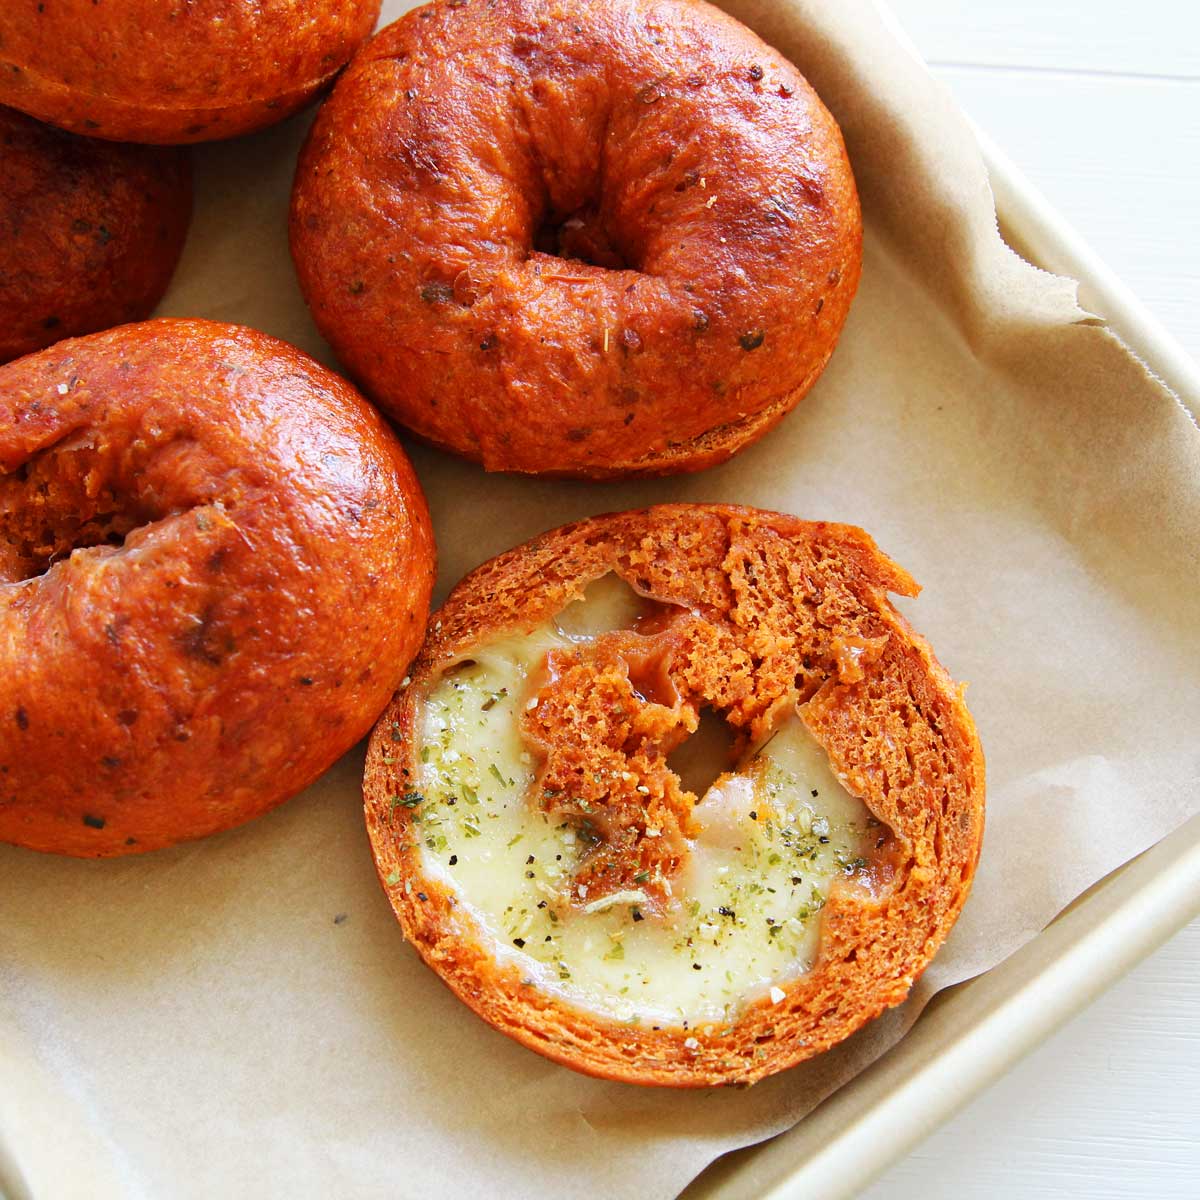 Game-changing Pizza Bagels! Overnight Tomato Bagels Stuffed With Cheese - Pistachio Nice Cream